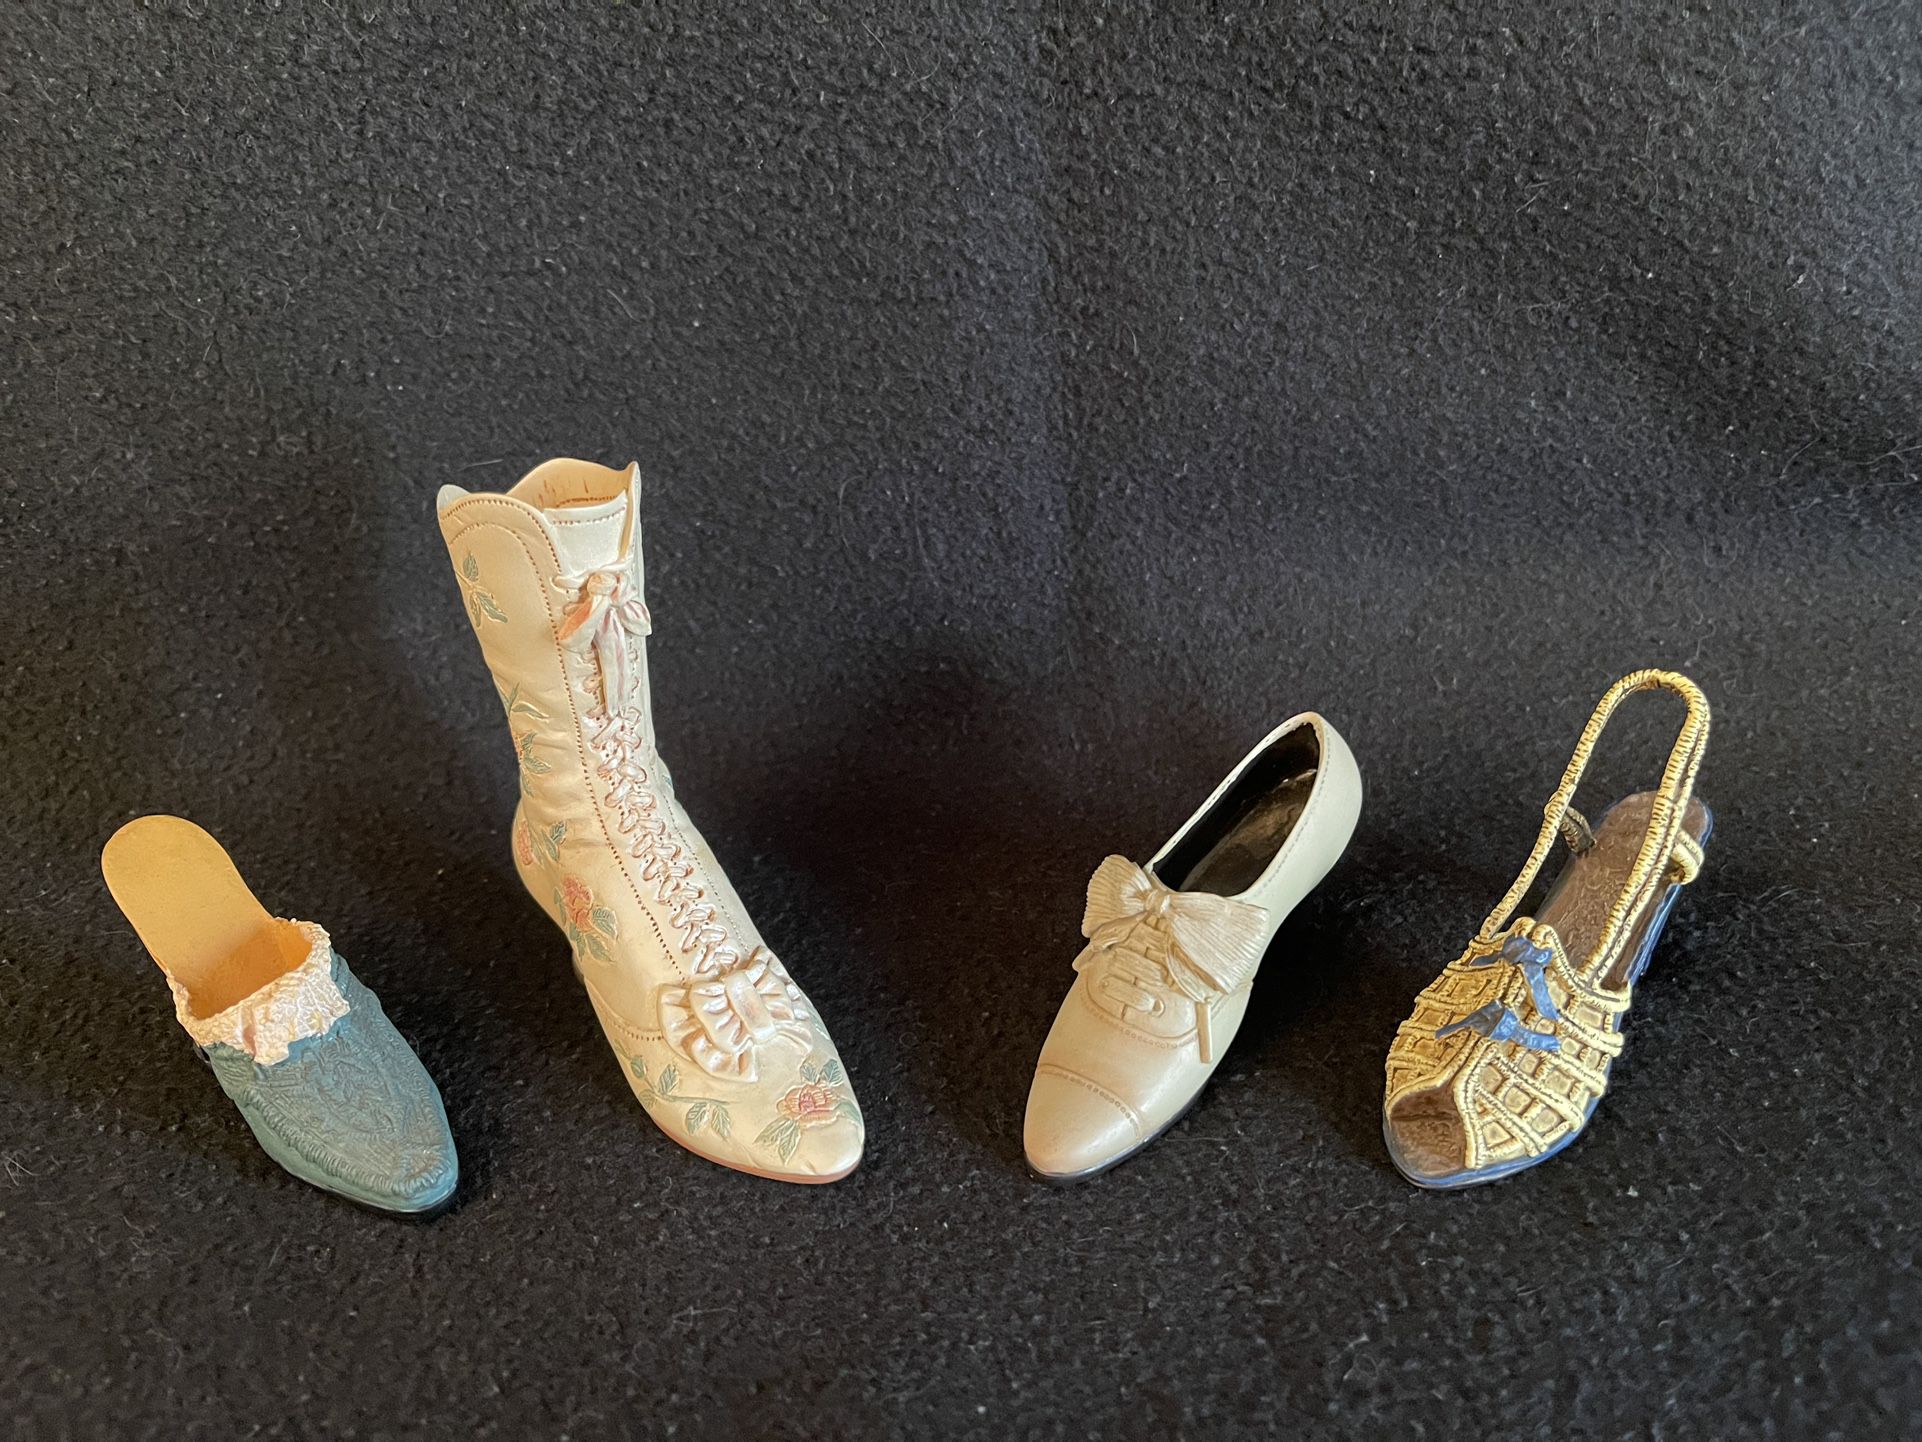 4 Lot Just the Right Shoe by Raine - Victorian Wedding Boot 1999 Figurine + QCOK